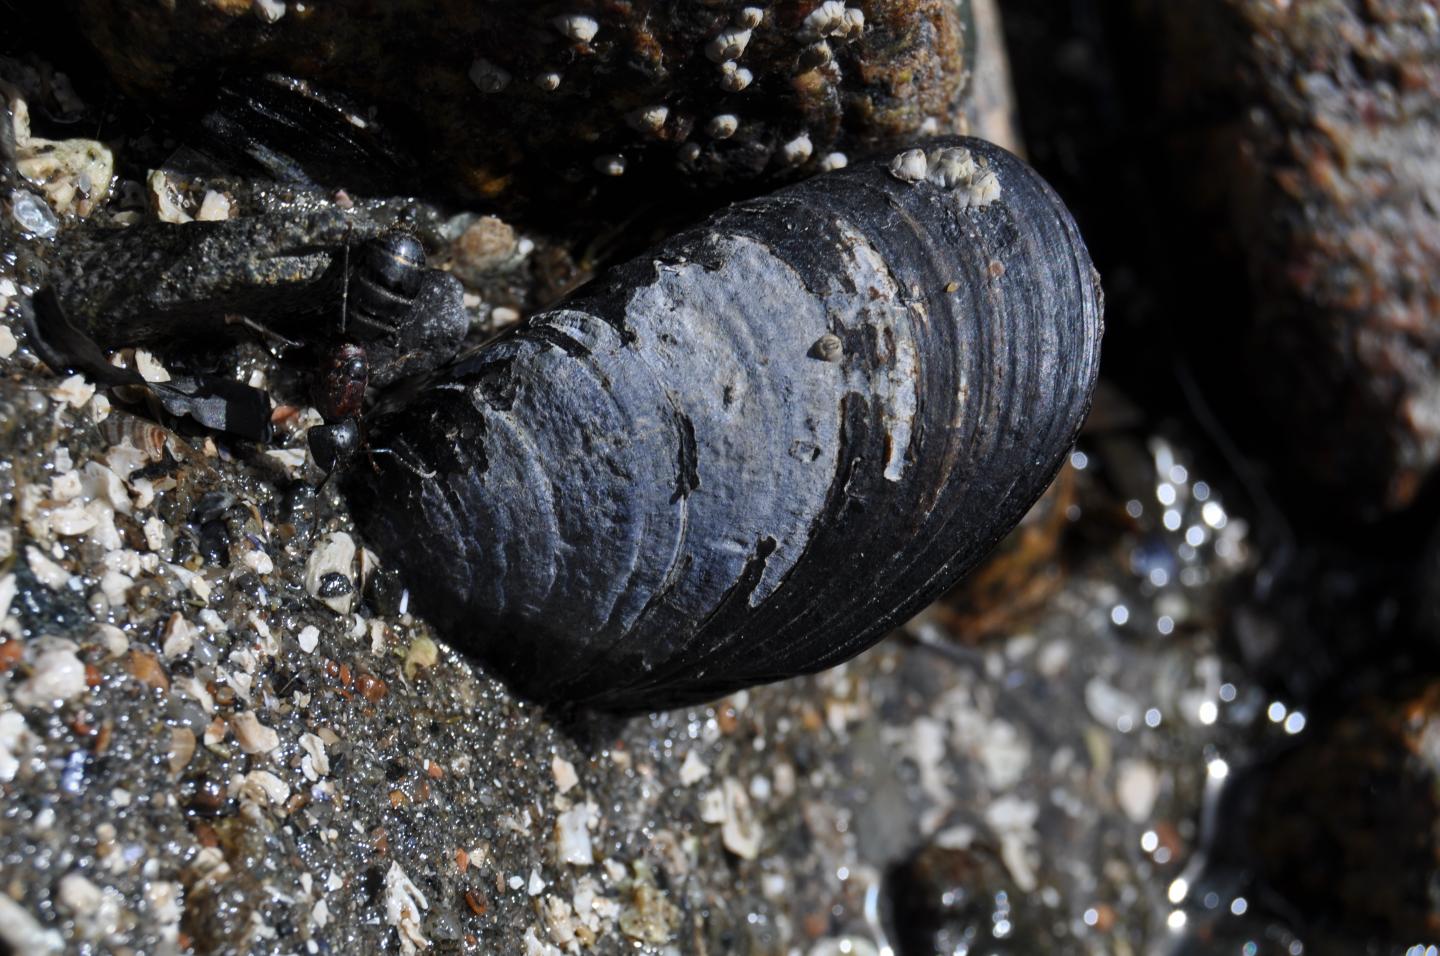 Blue Mussel Clings to a Rock at Mount Desert Island, Maine